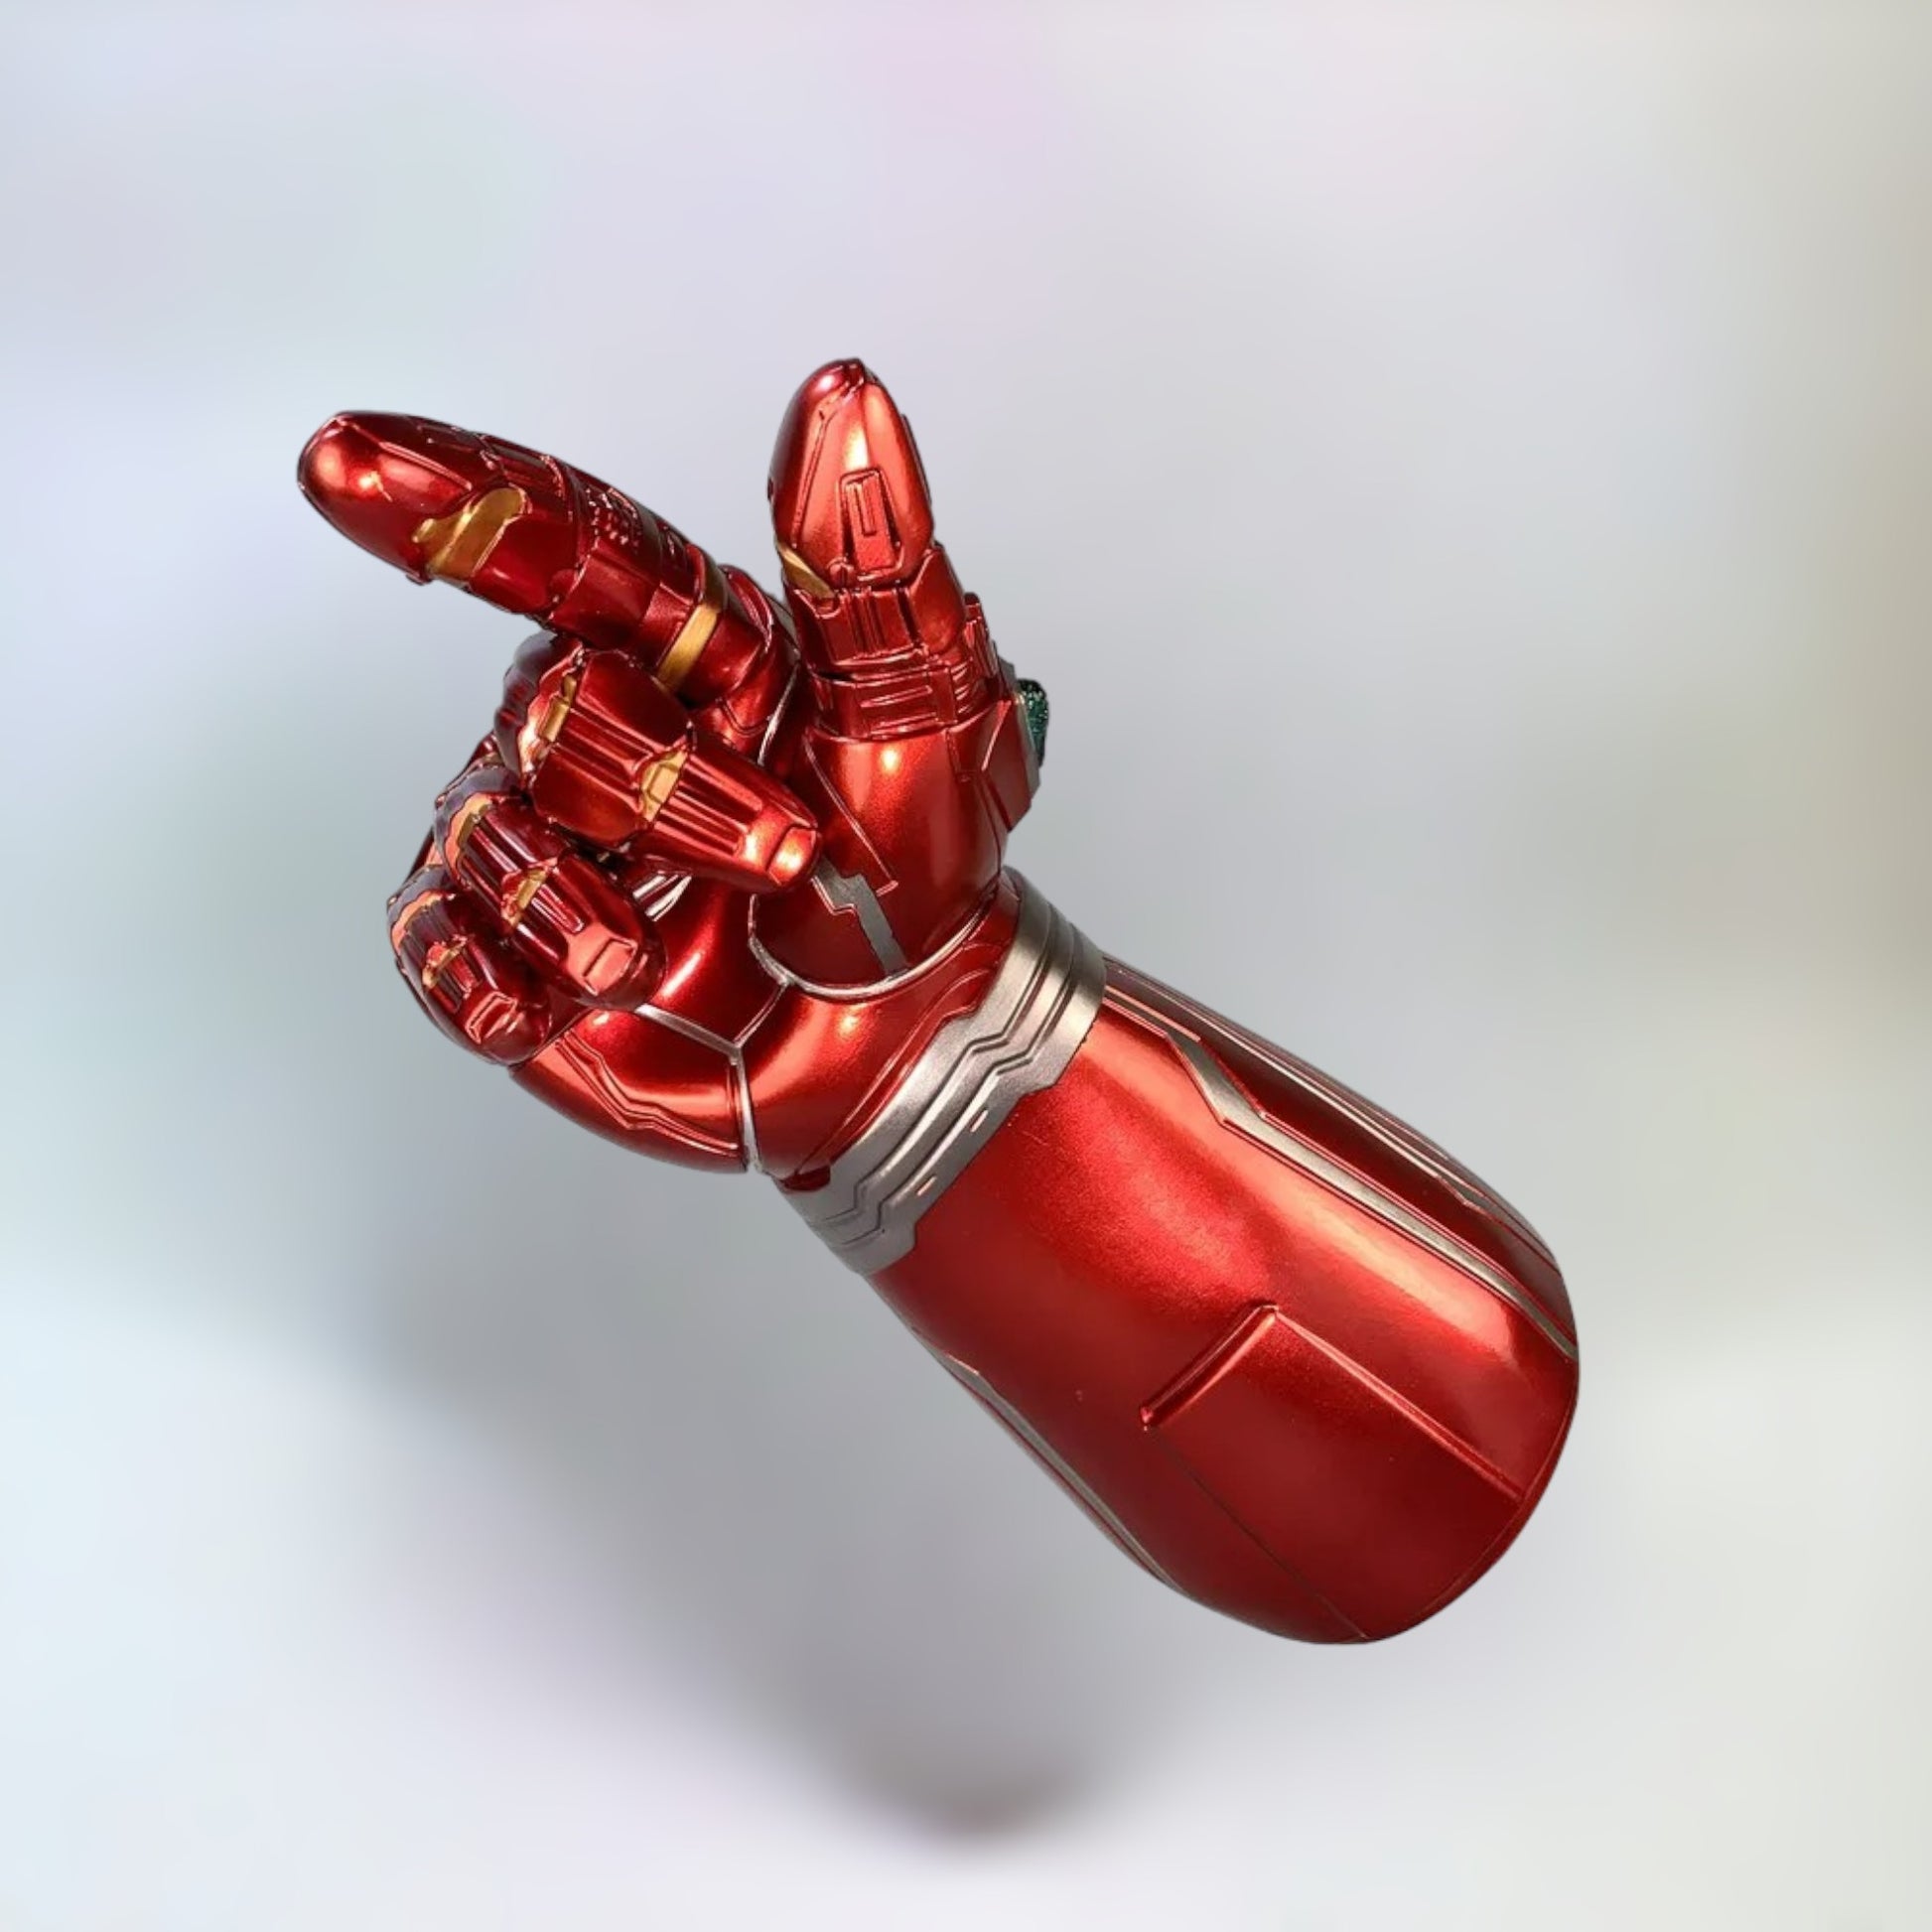 Ironman infinity gauntlet replica toy finger snap with plain white background